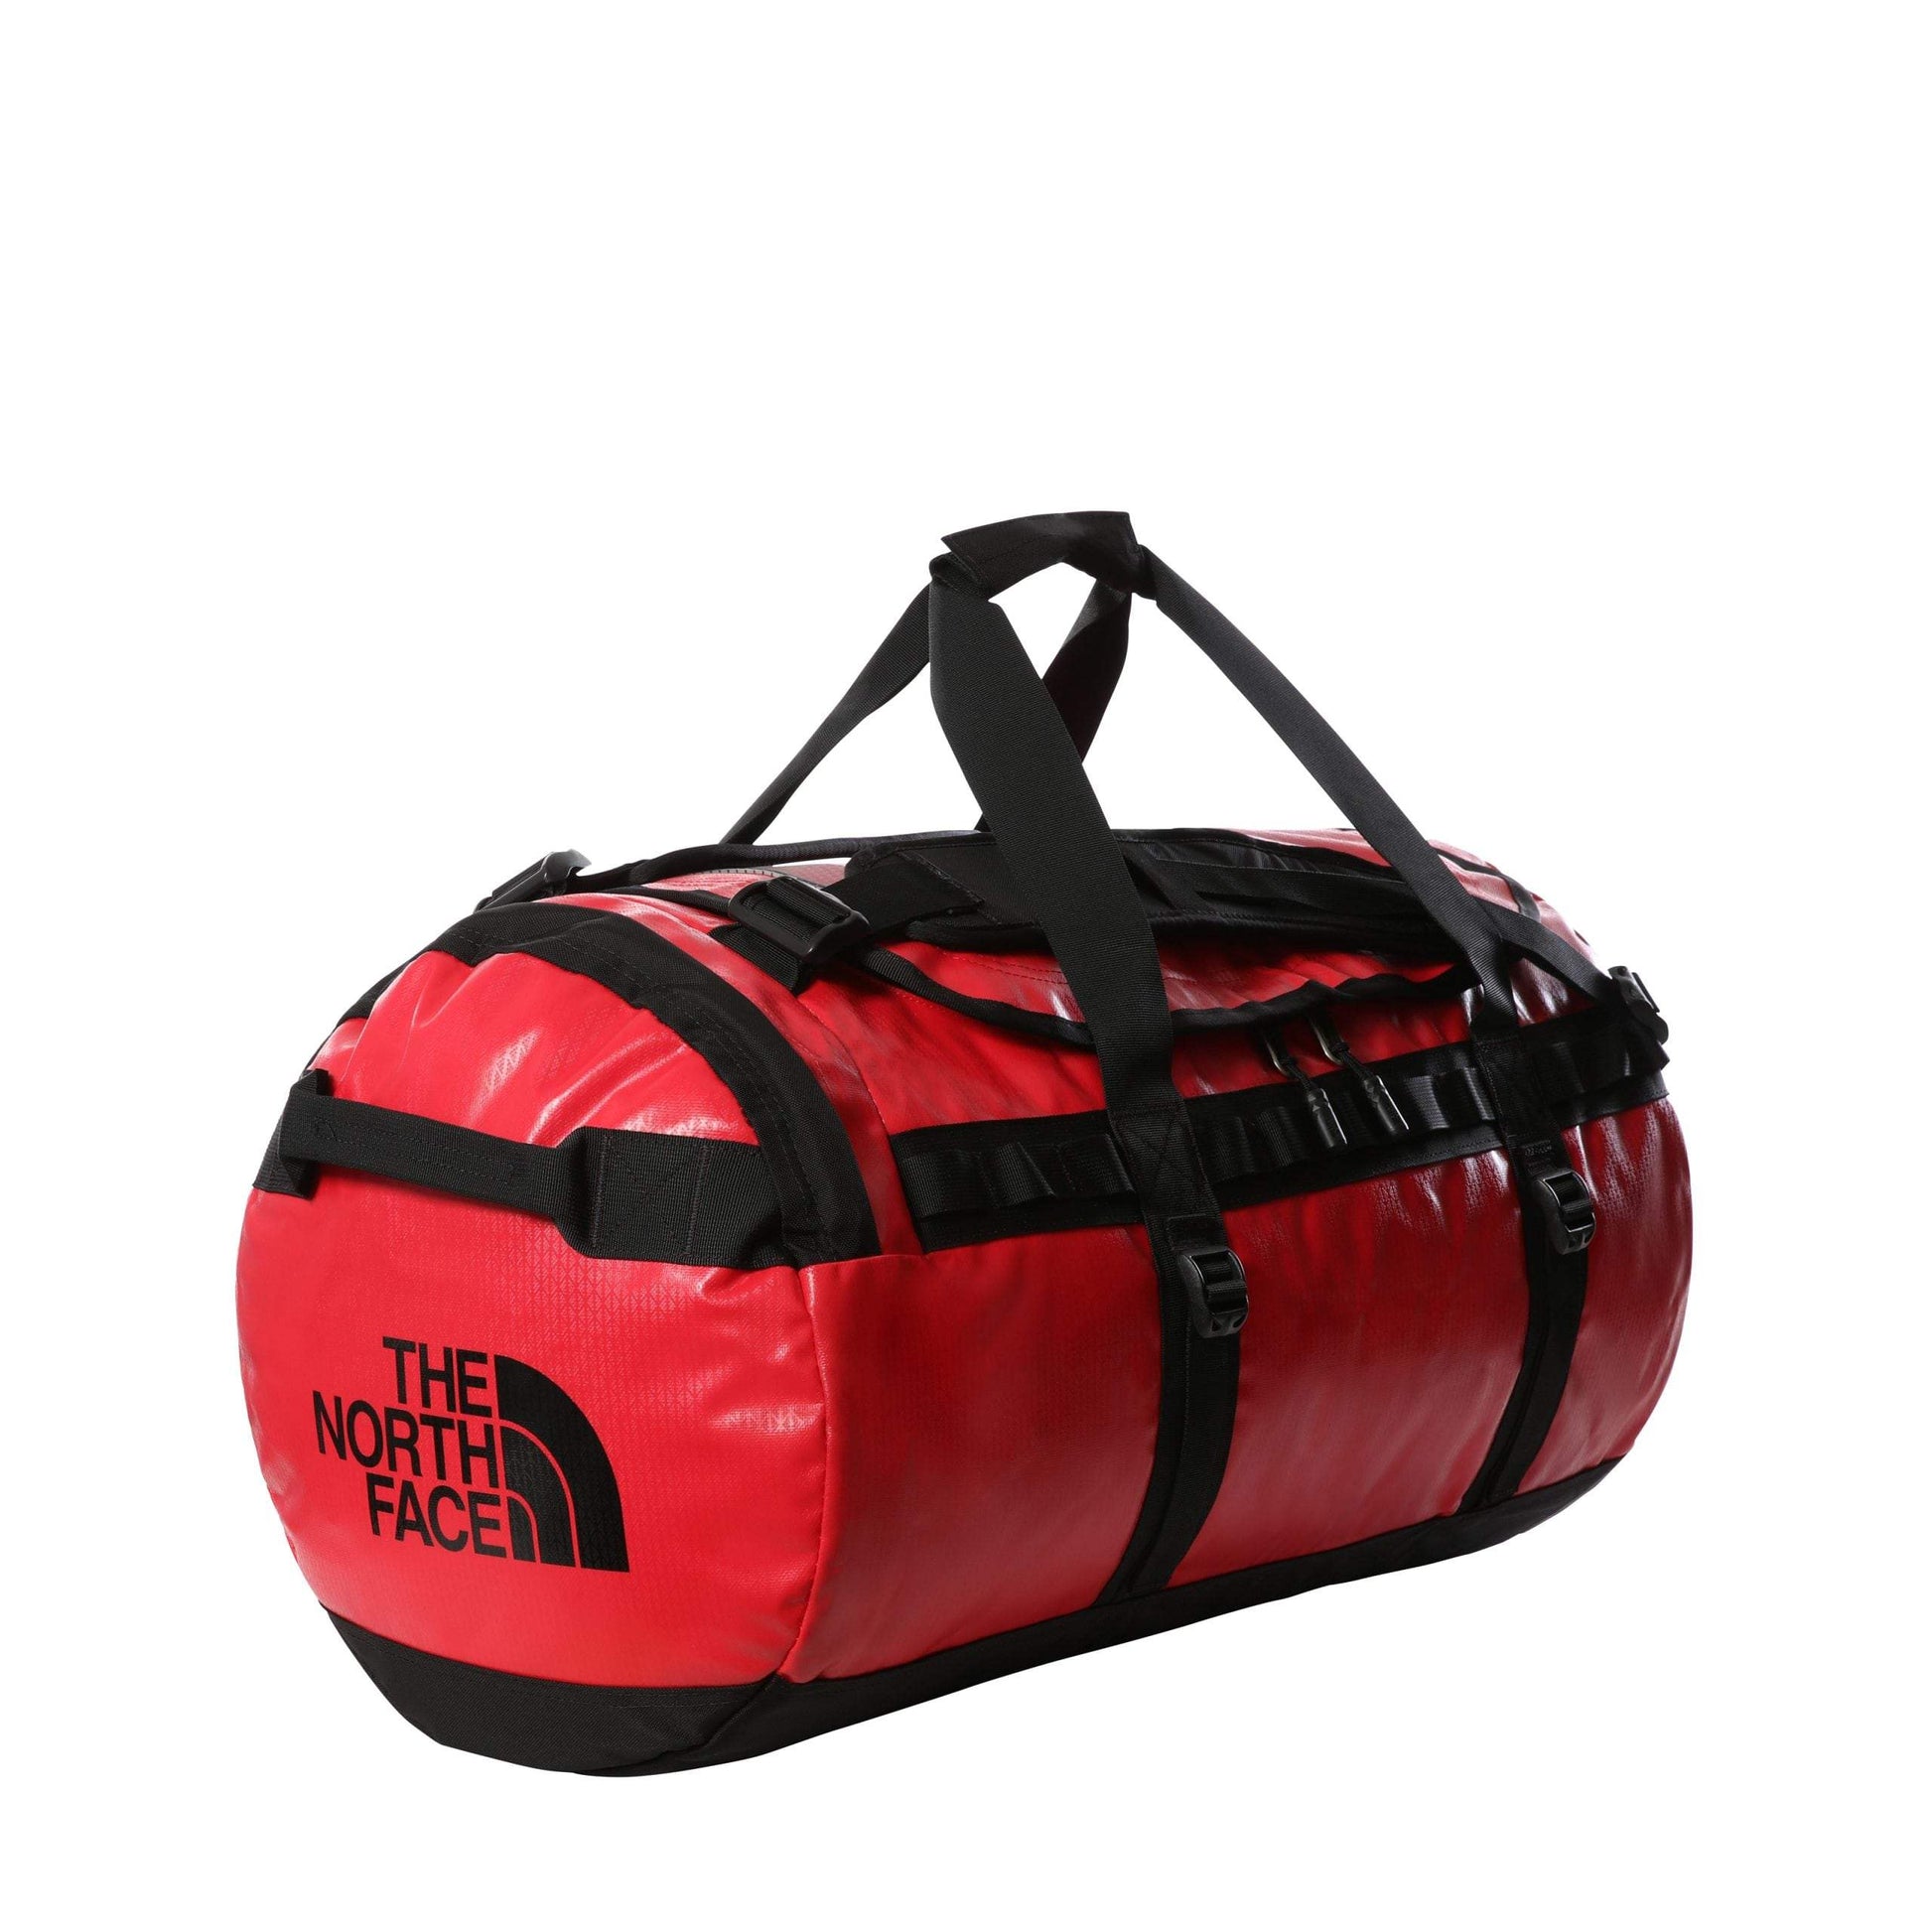 Base Camp Duffel (M) by The North Face 71L - The Luxury Promotional Gifts Company Limited